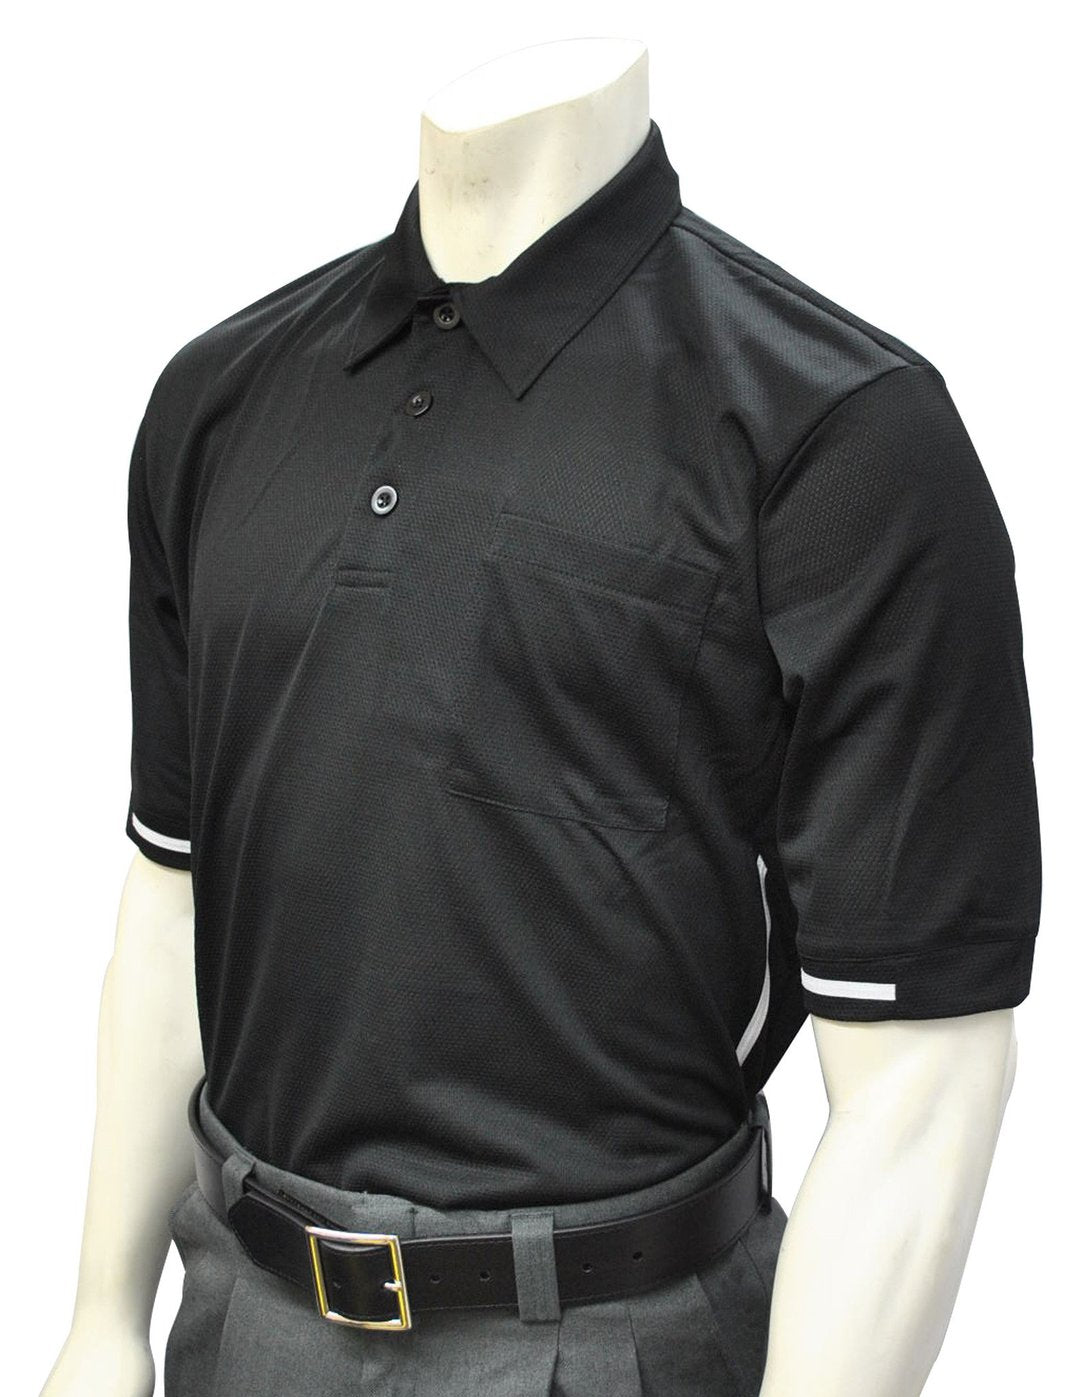 BBS-310 "Major League" Style Shirts - Performance Mesh Fabric - Available in Black and Carolina Blue